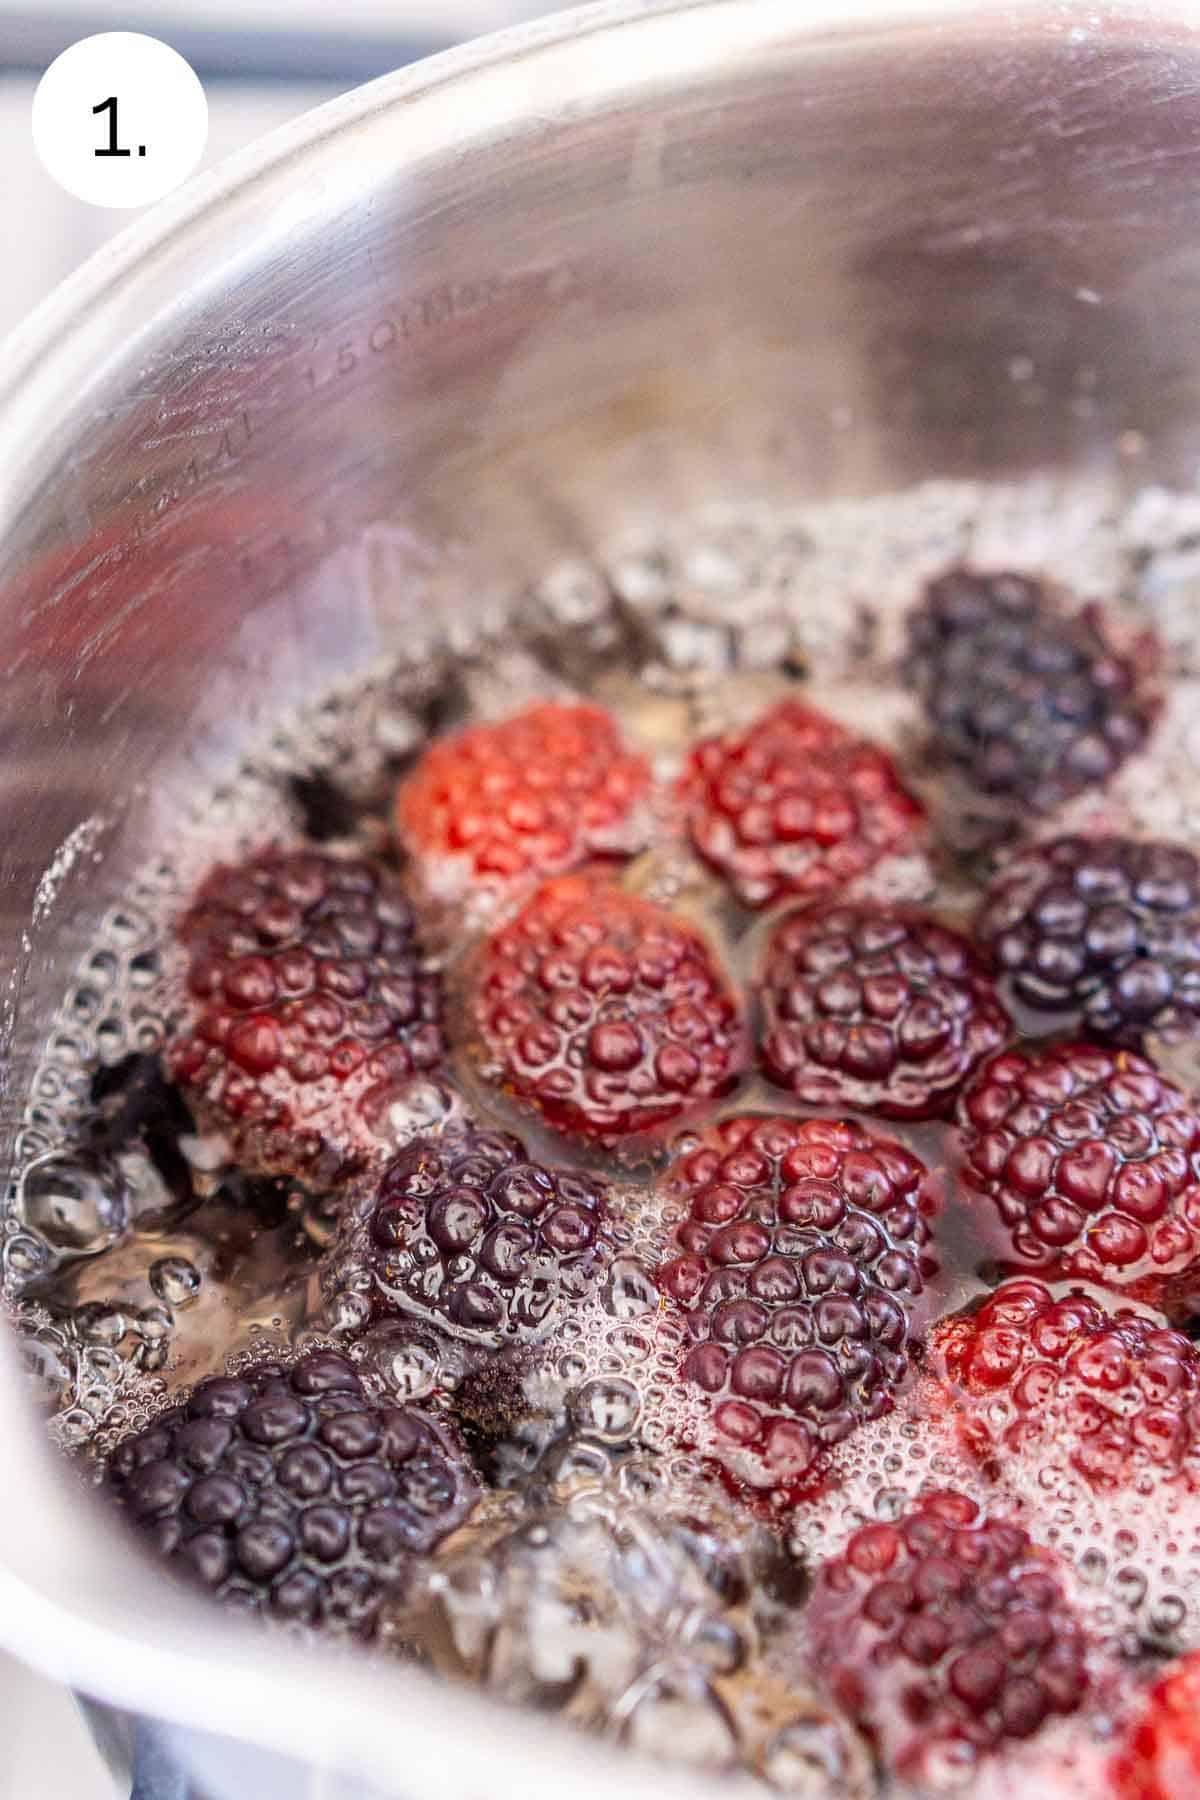 Boiling the blackberries in water and sugar in a small stainless steel saucepan on the stove.